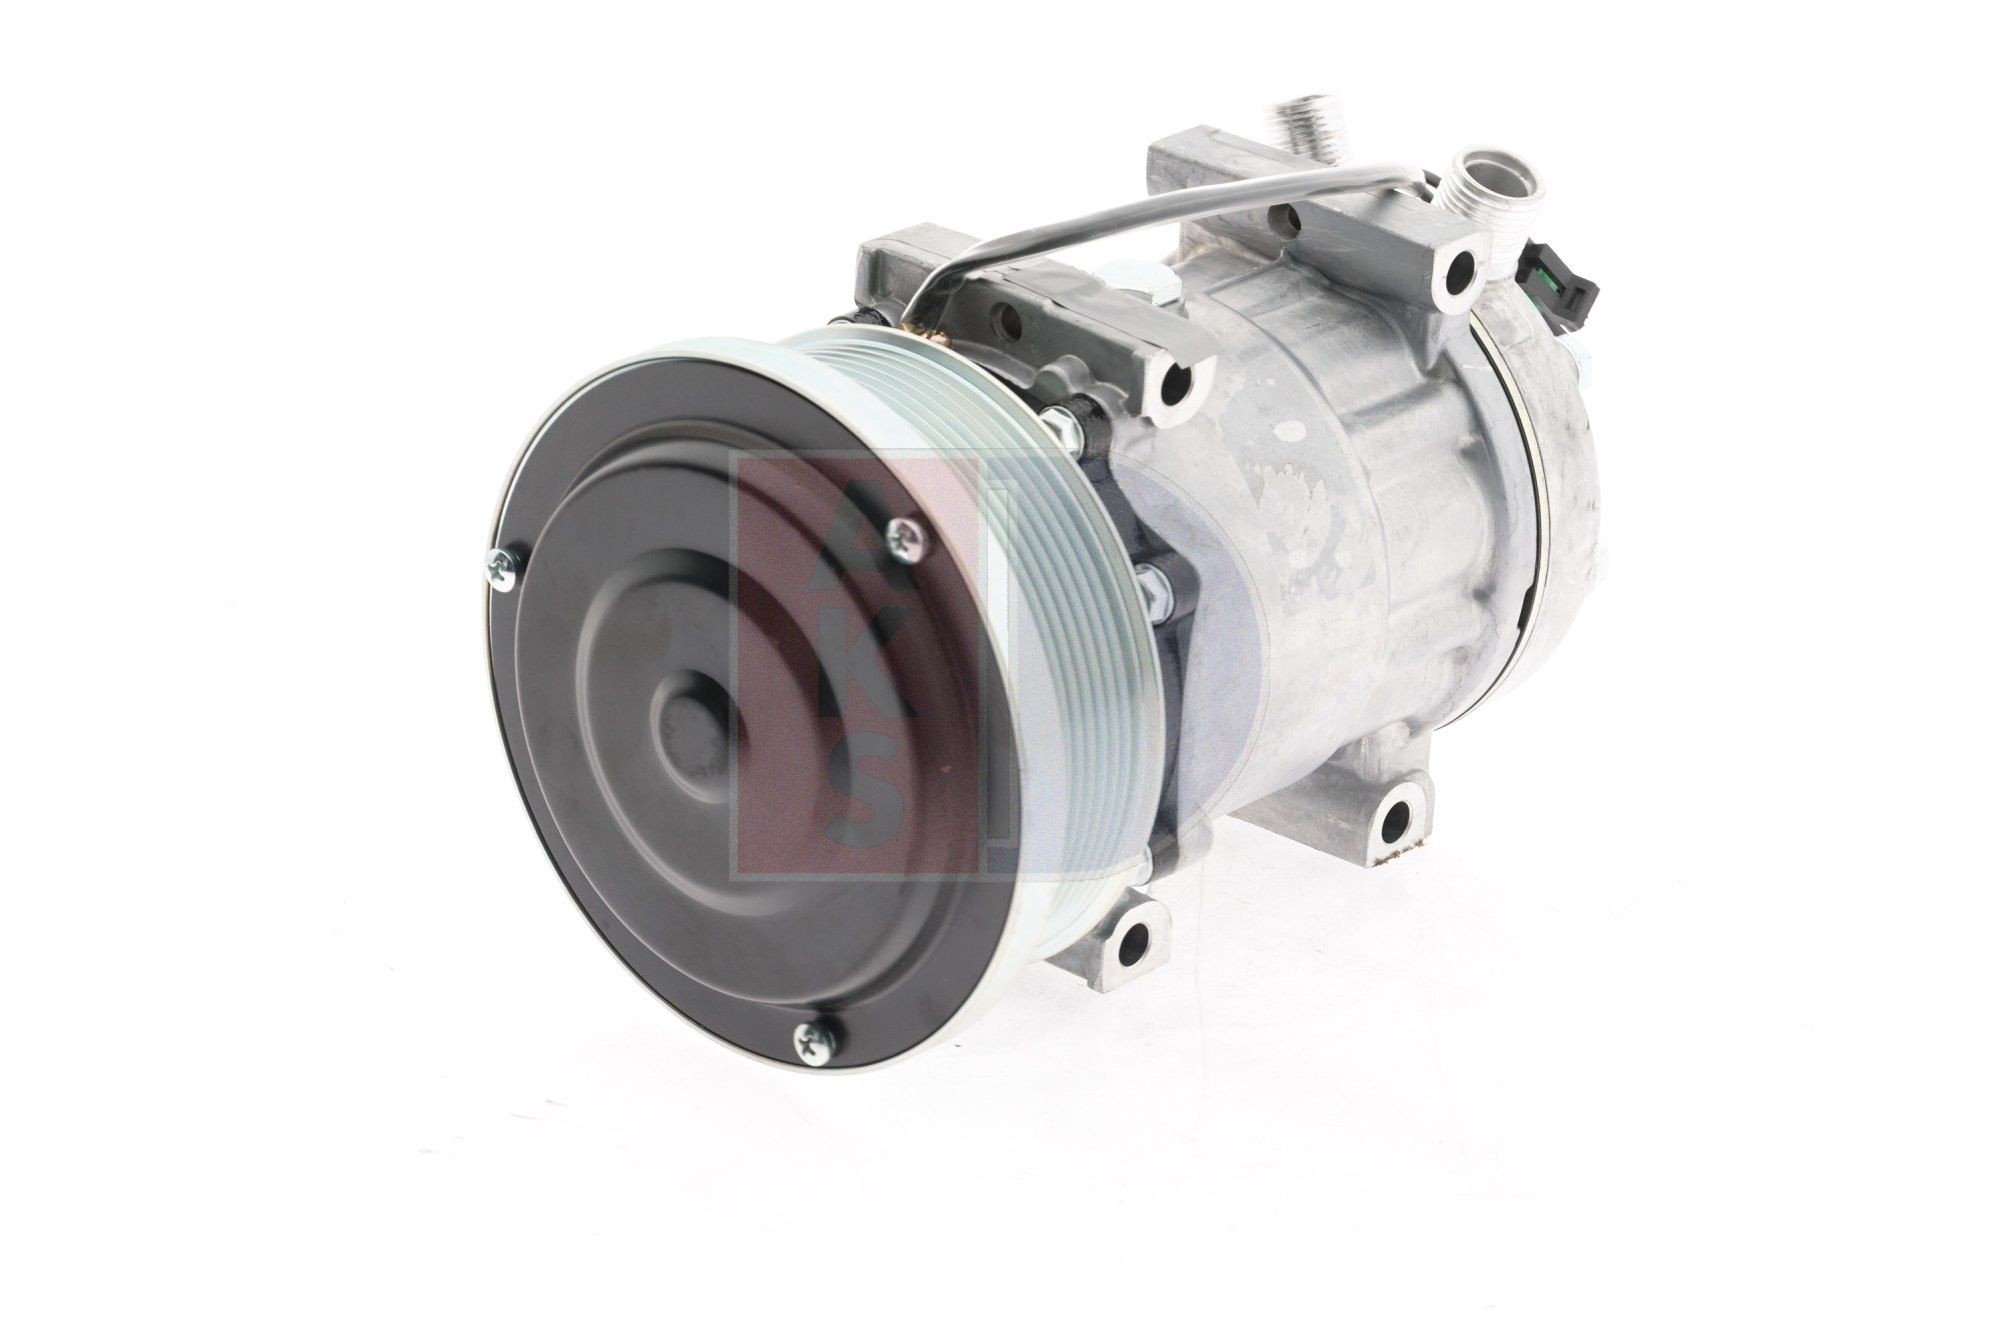 Air conditioning compressor 851756N from AKS DASIS